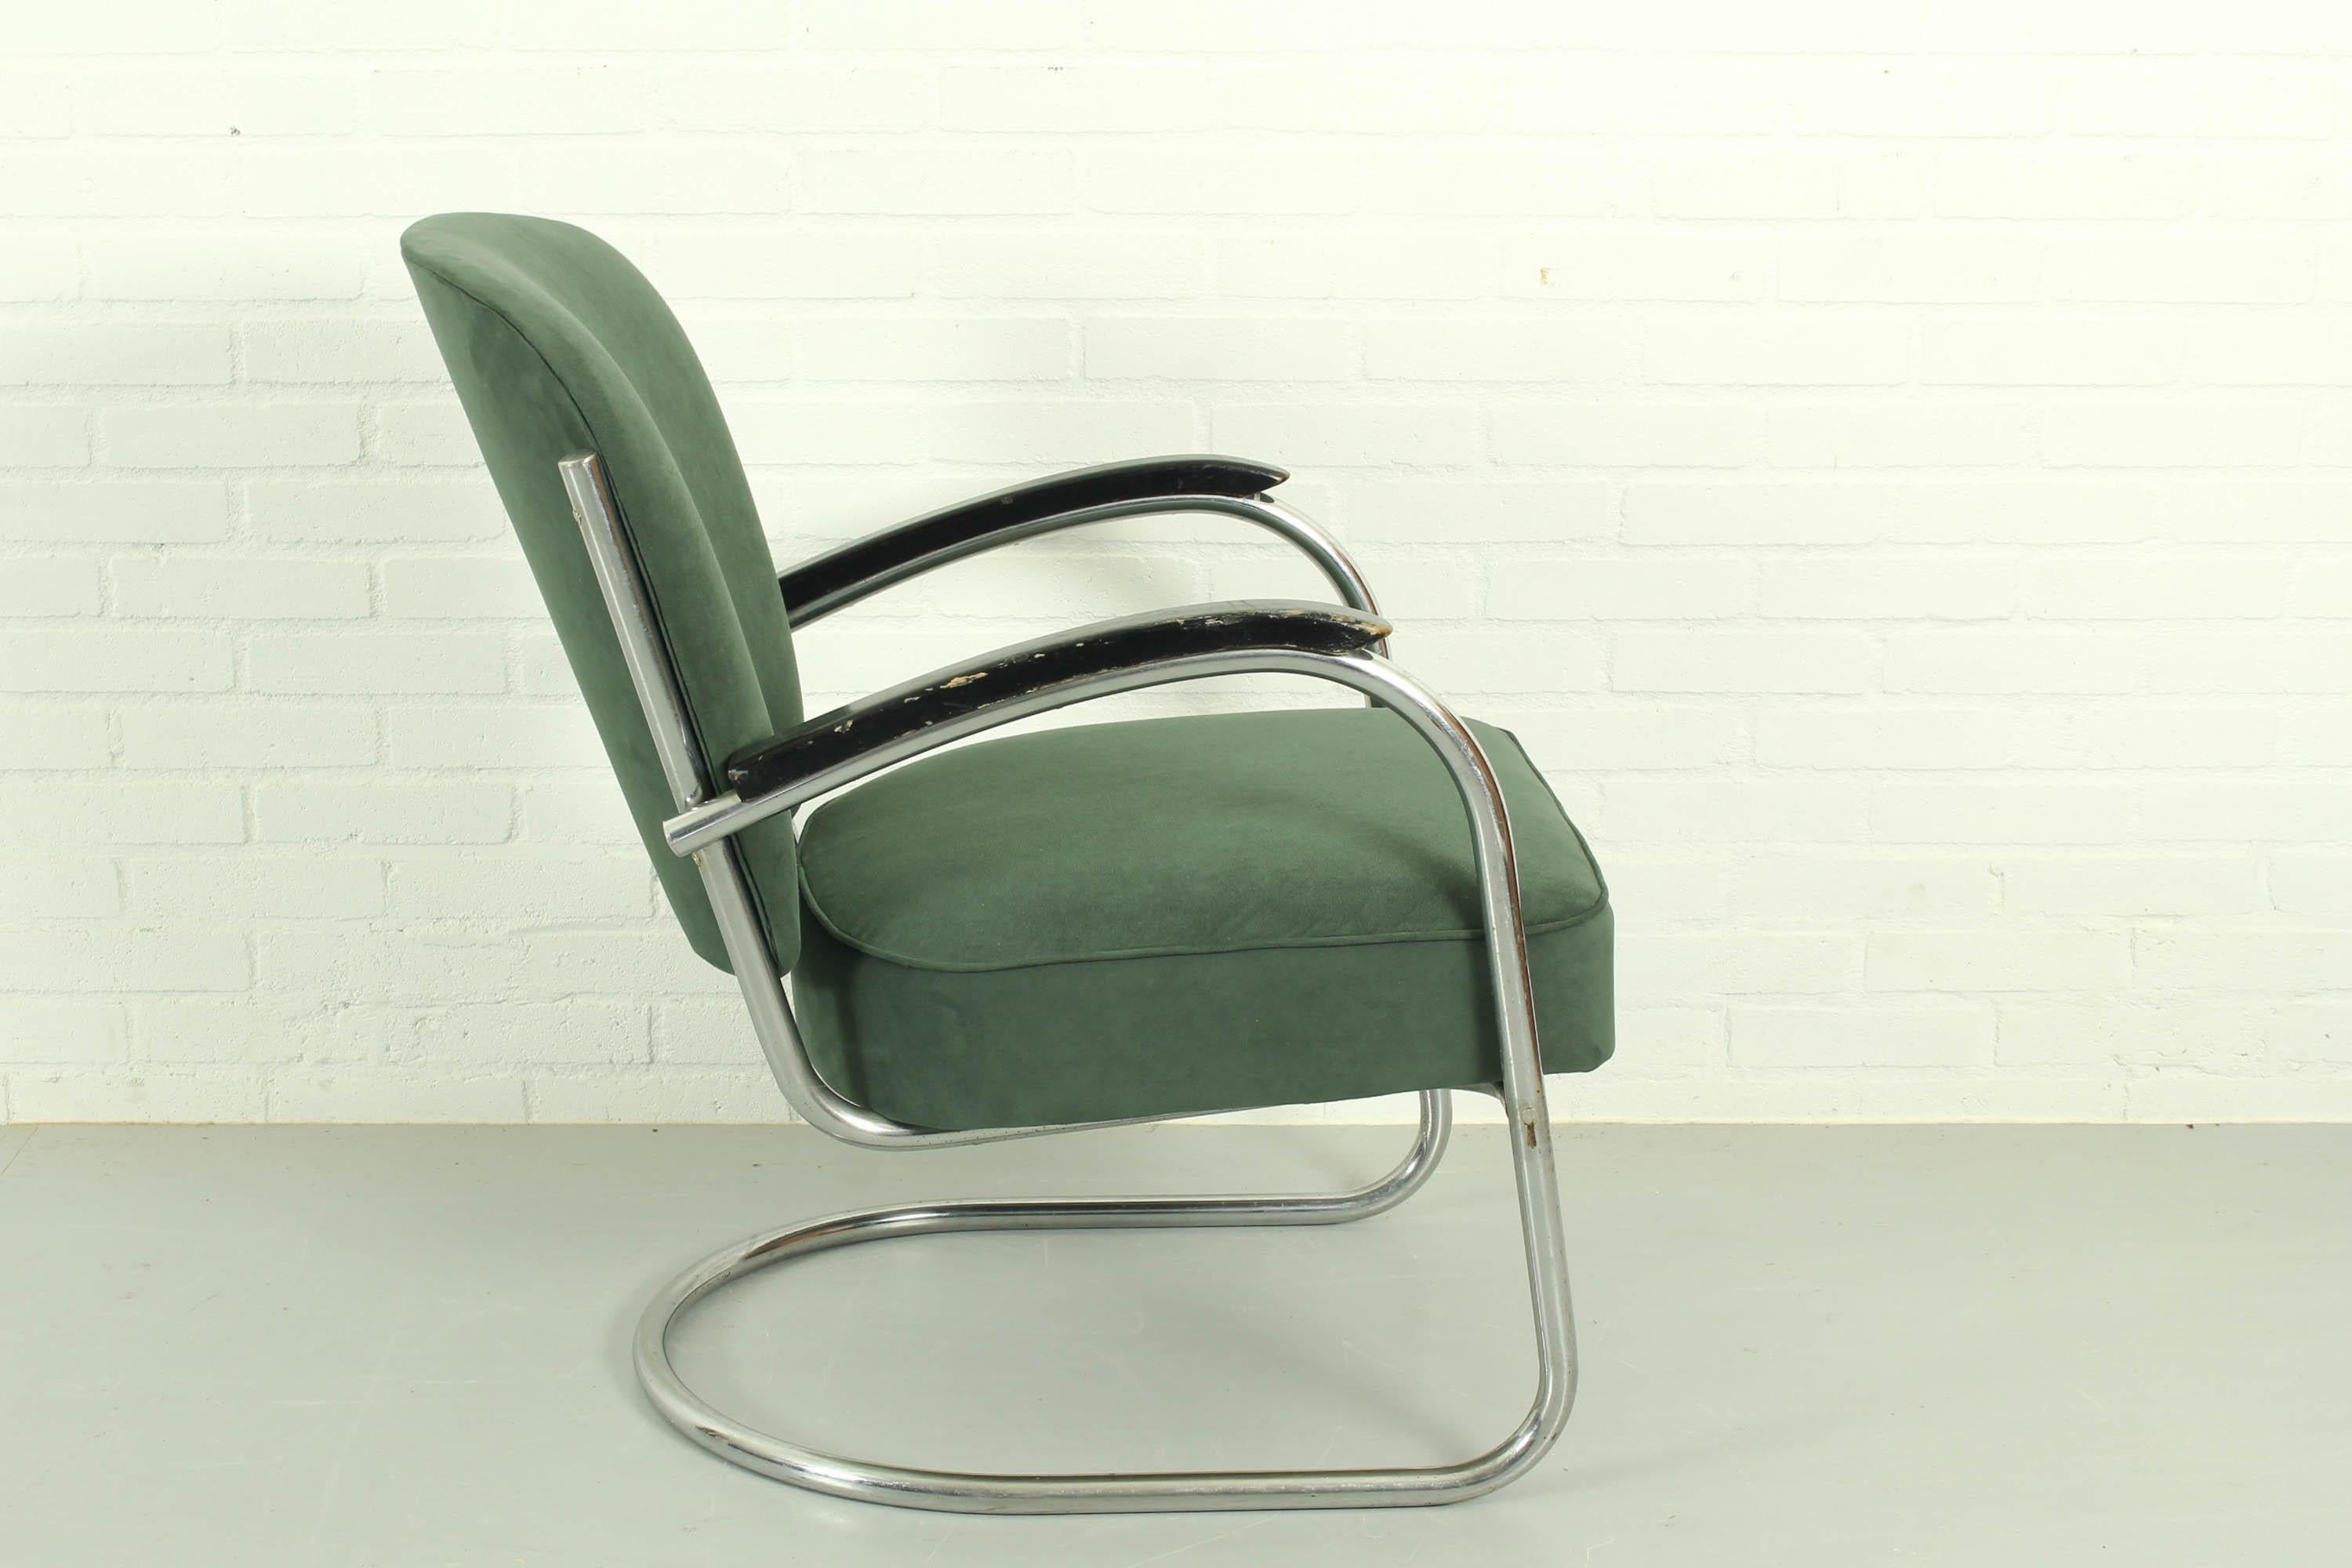 Plated Model 436 Lounge Chair by Paul Schuitema For D3, 1930s For Sale